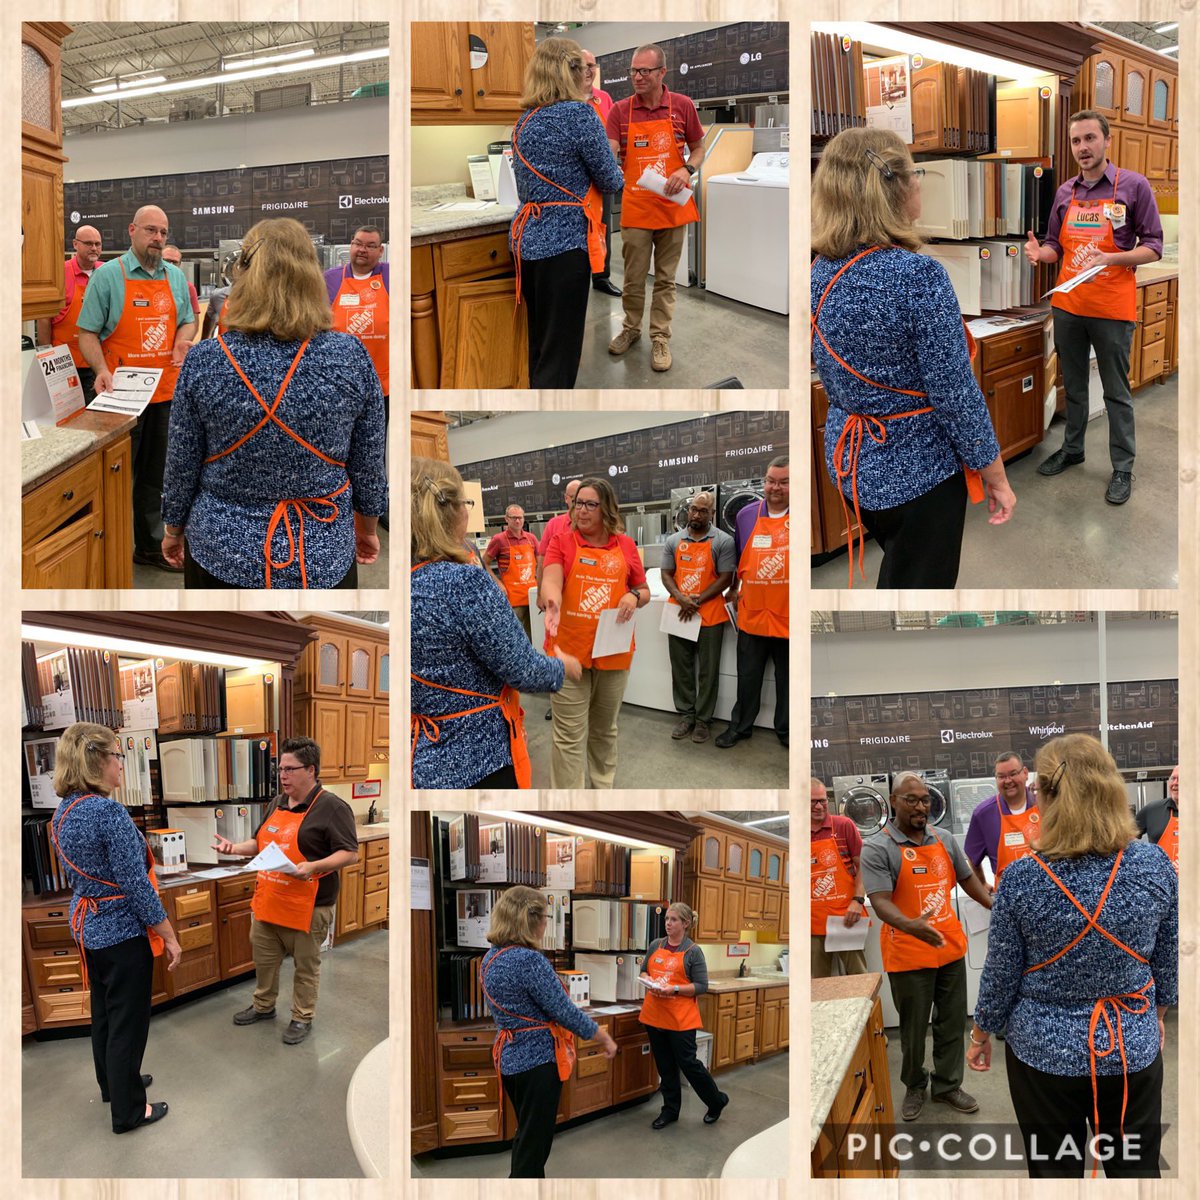 Tap in tap out! Great job SASM’S and MASM’S role playing today during TOM training! #D250Pride @HouleHeather @t_renard_ @Matthew10903420 @wayne2314 @Dave_Dawber @wayne2314 @HomeDepotWest @HauckJenny @wamauzy @RStOnge250 @RobD250 @redwing19y @LorelWoodard